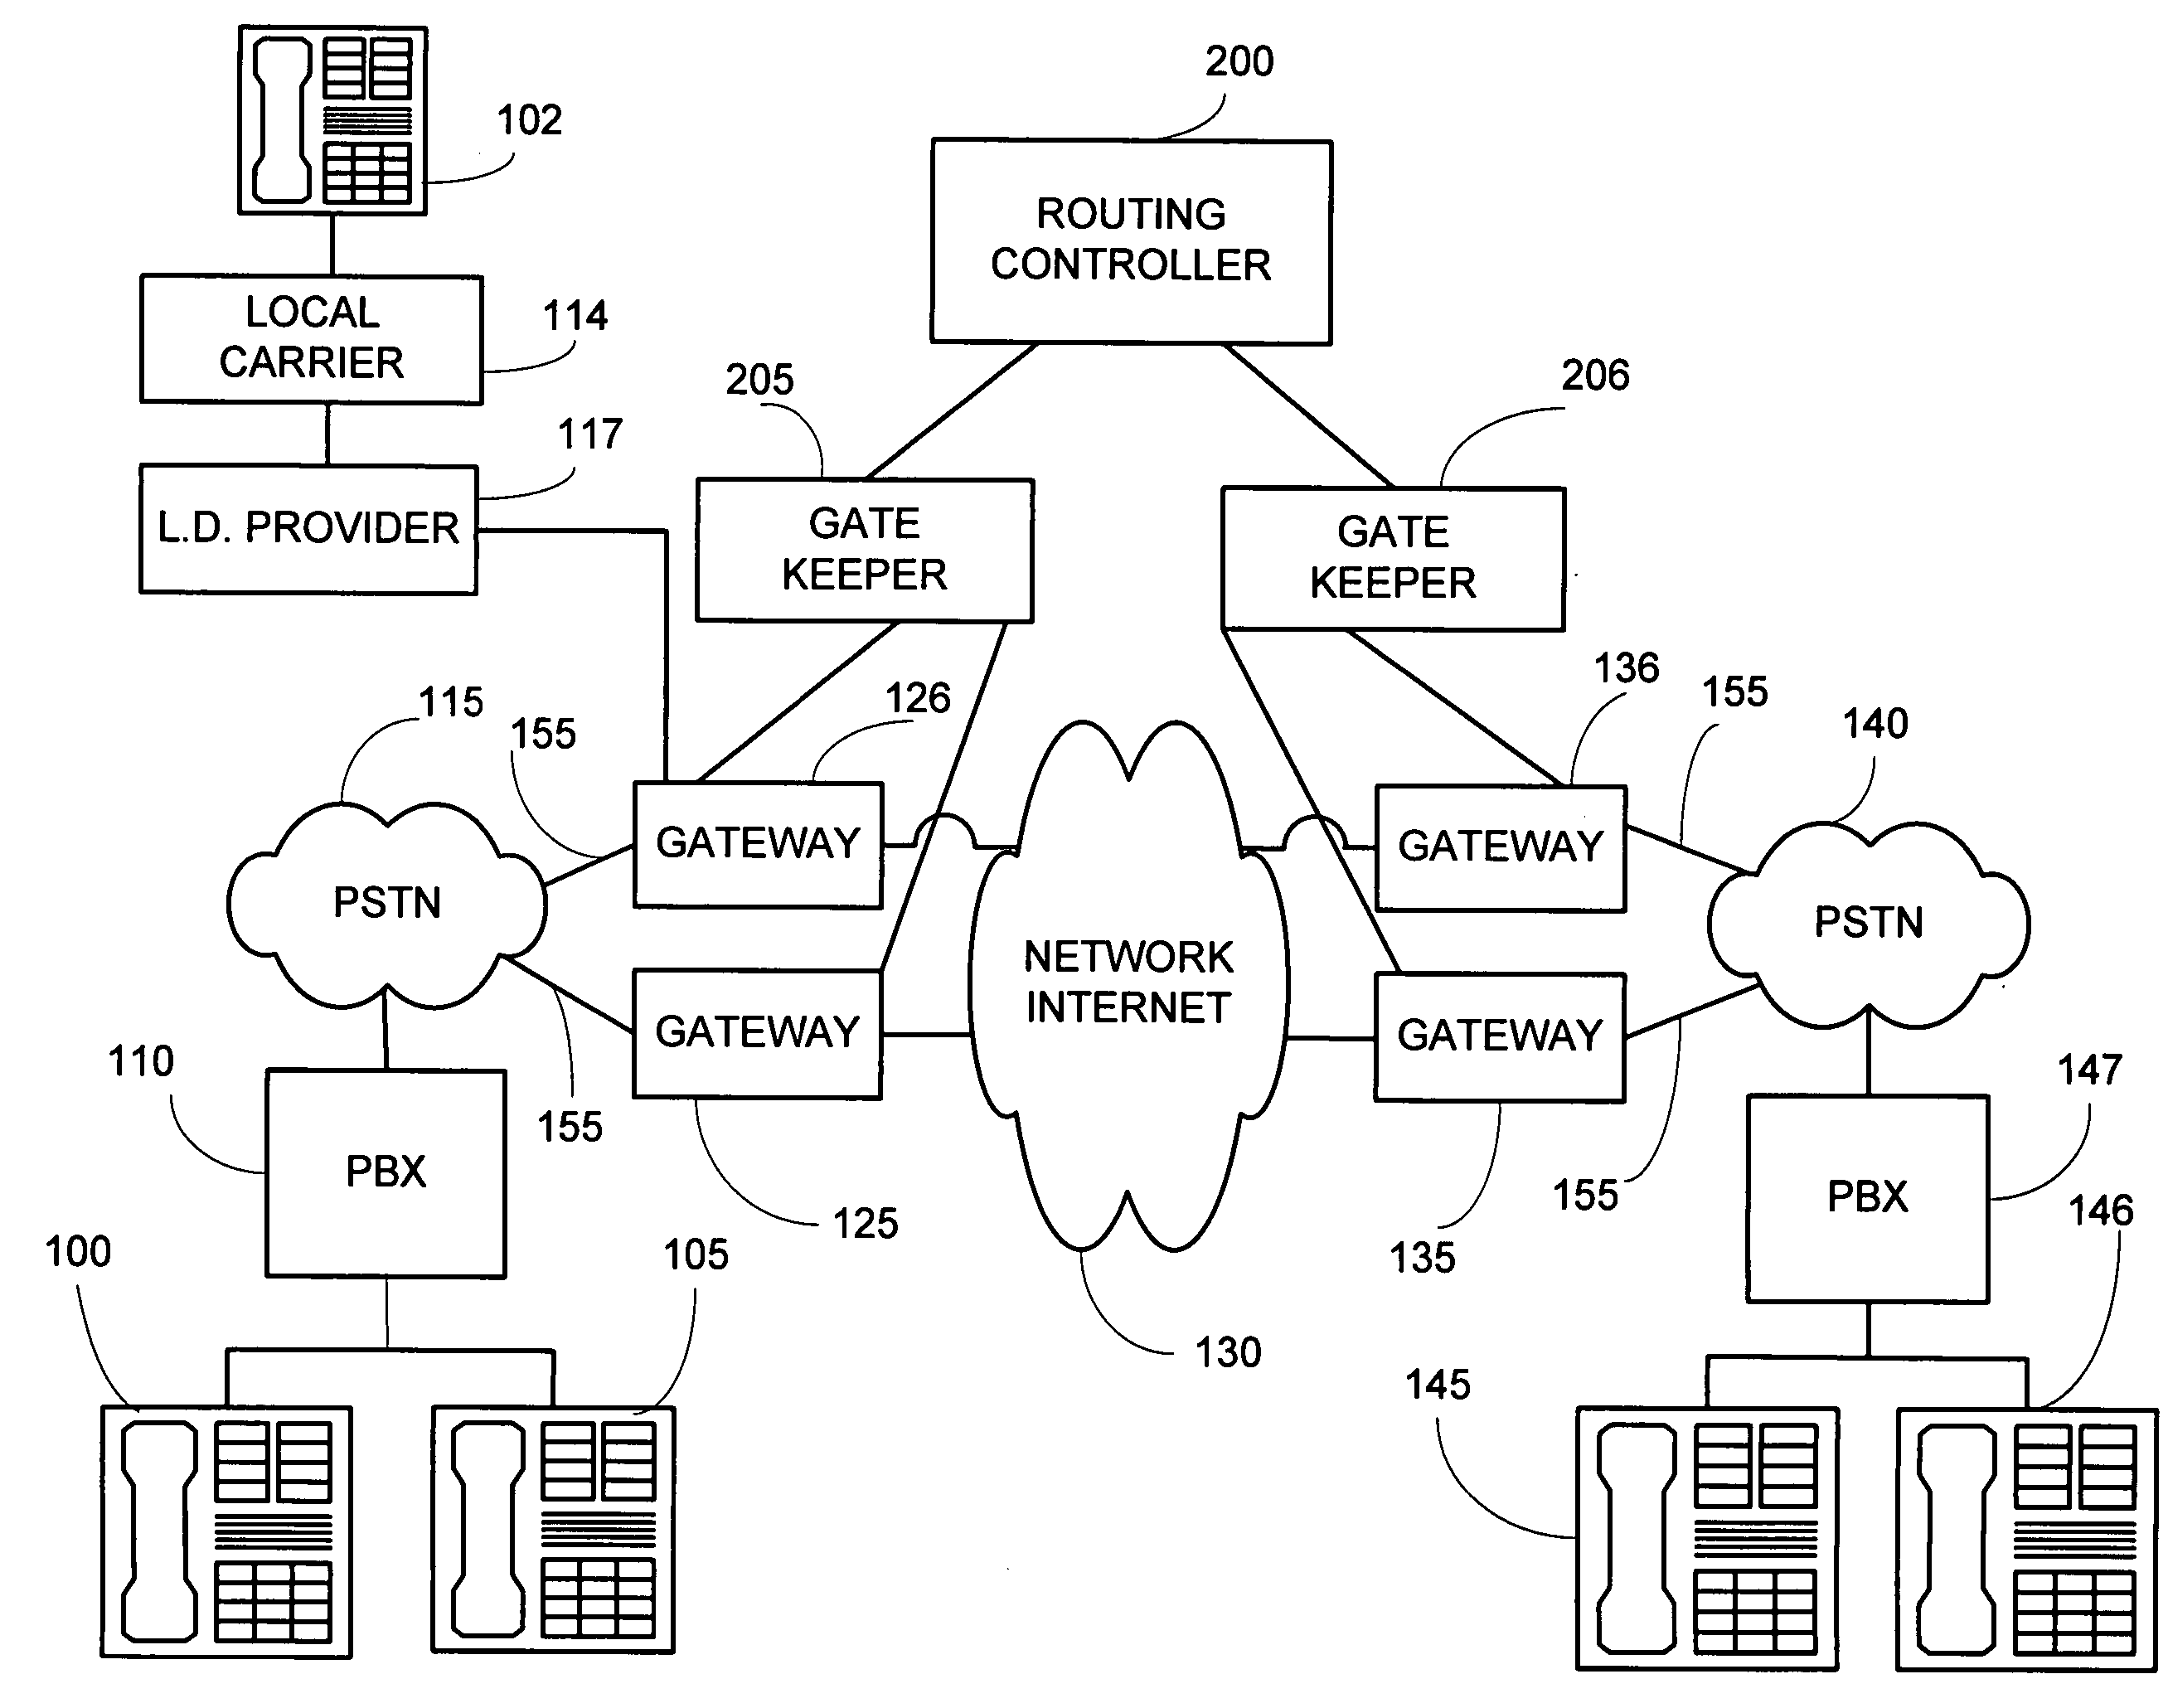 System and method for monitoring a voice over internet protocol (VoIP) system